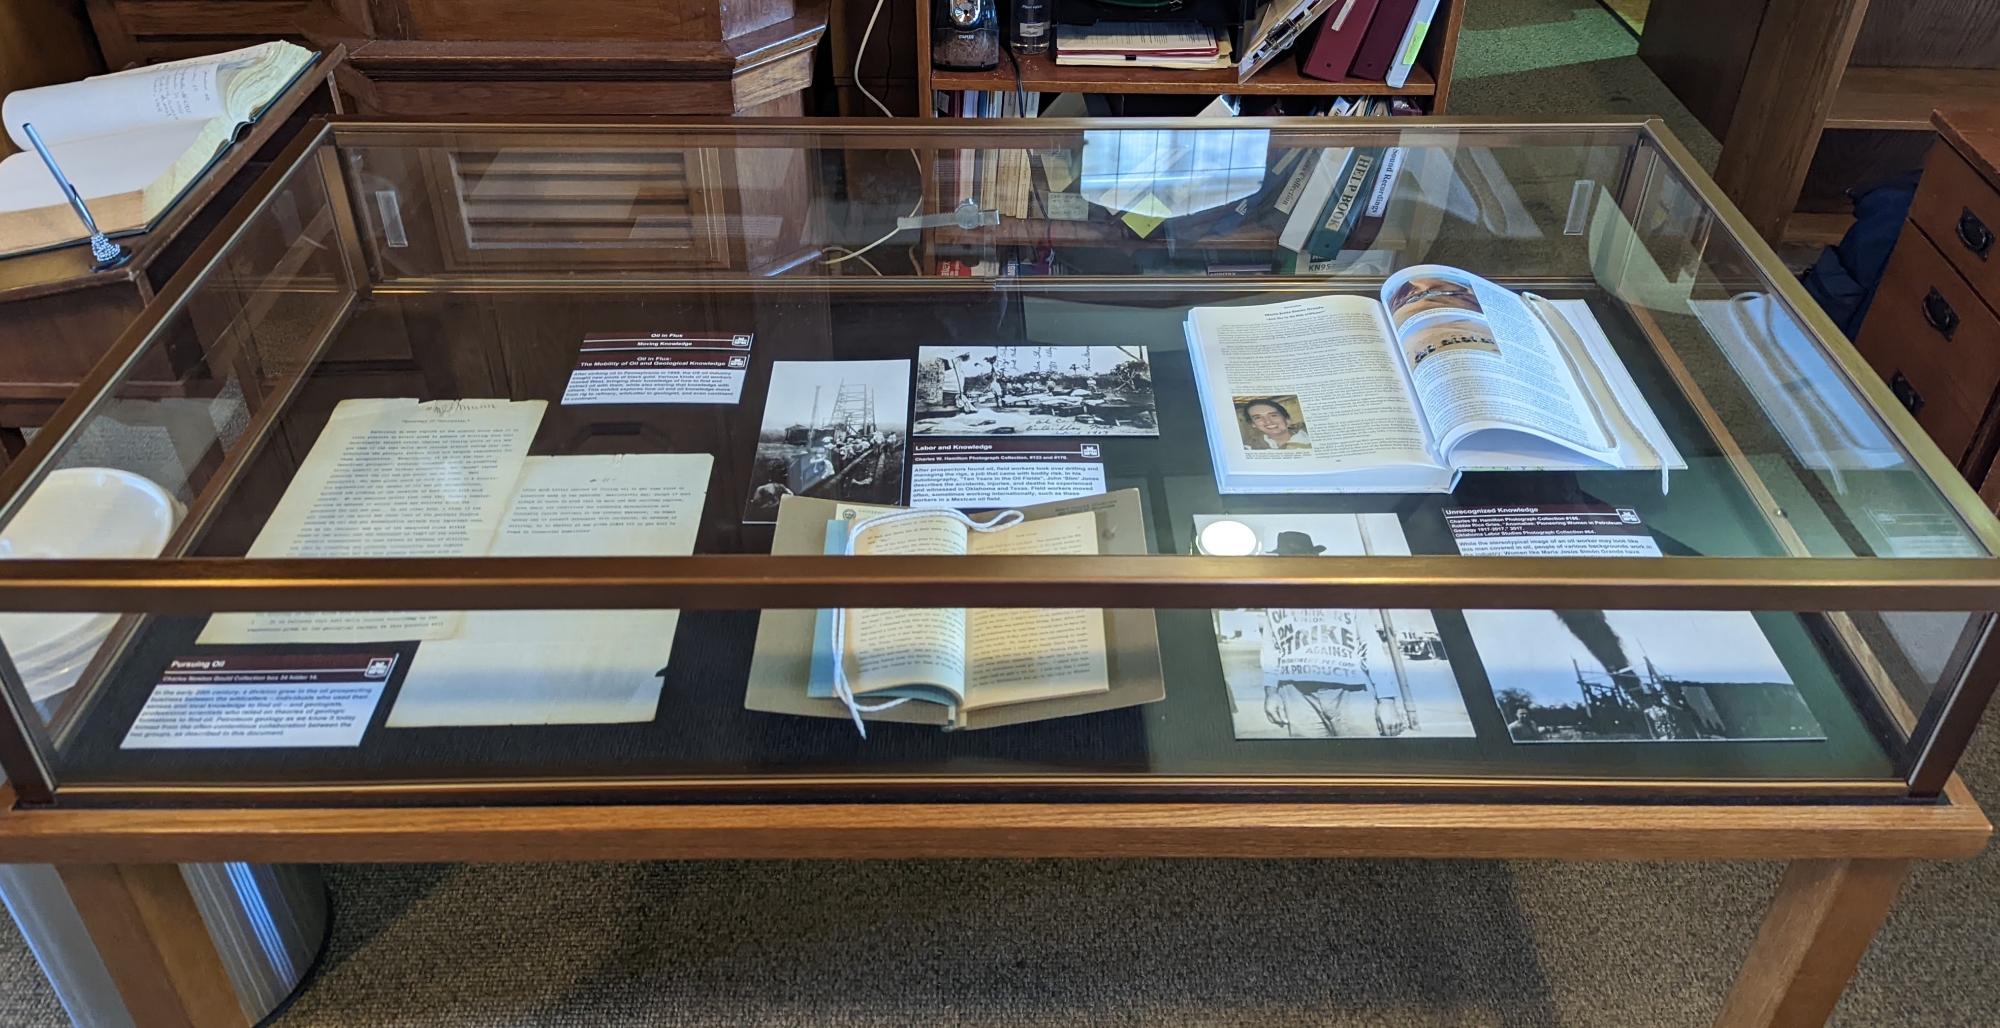 Photograph of glass exhibit display box with several documents on display inside.